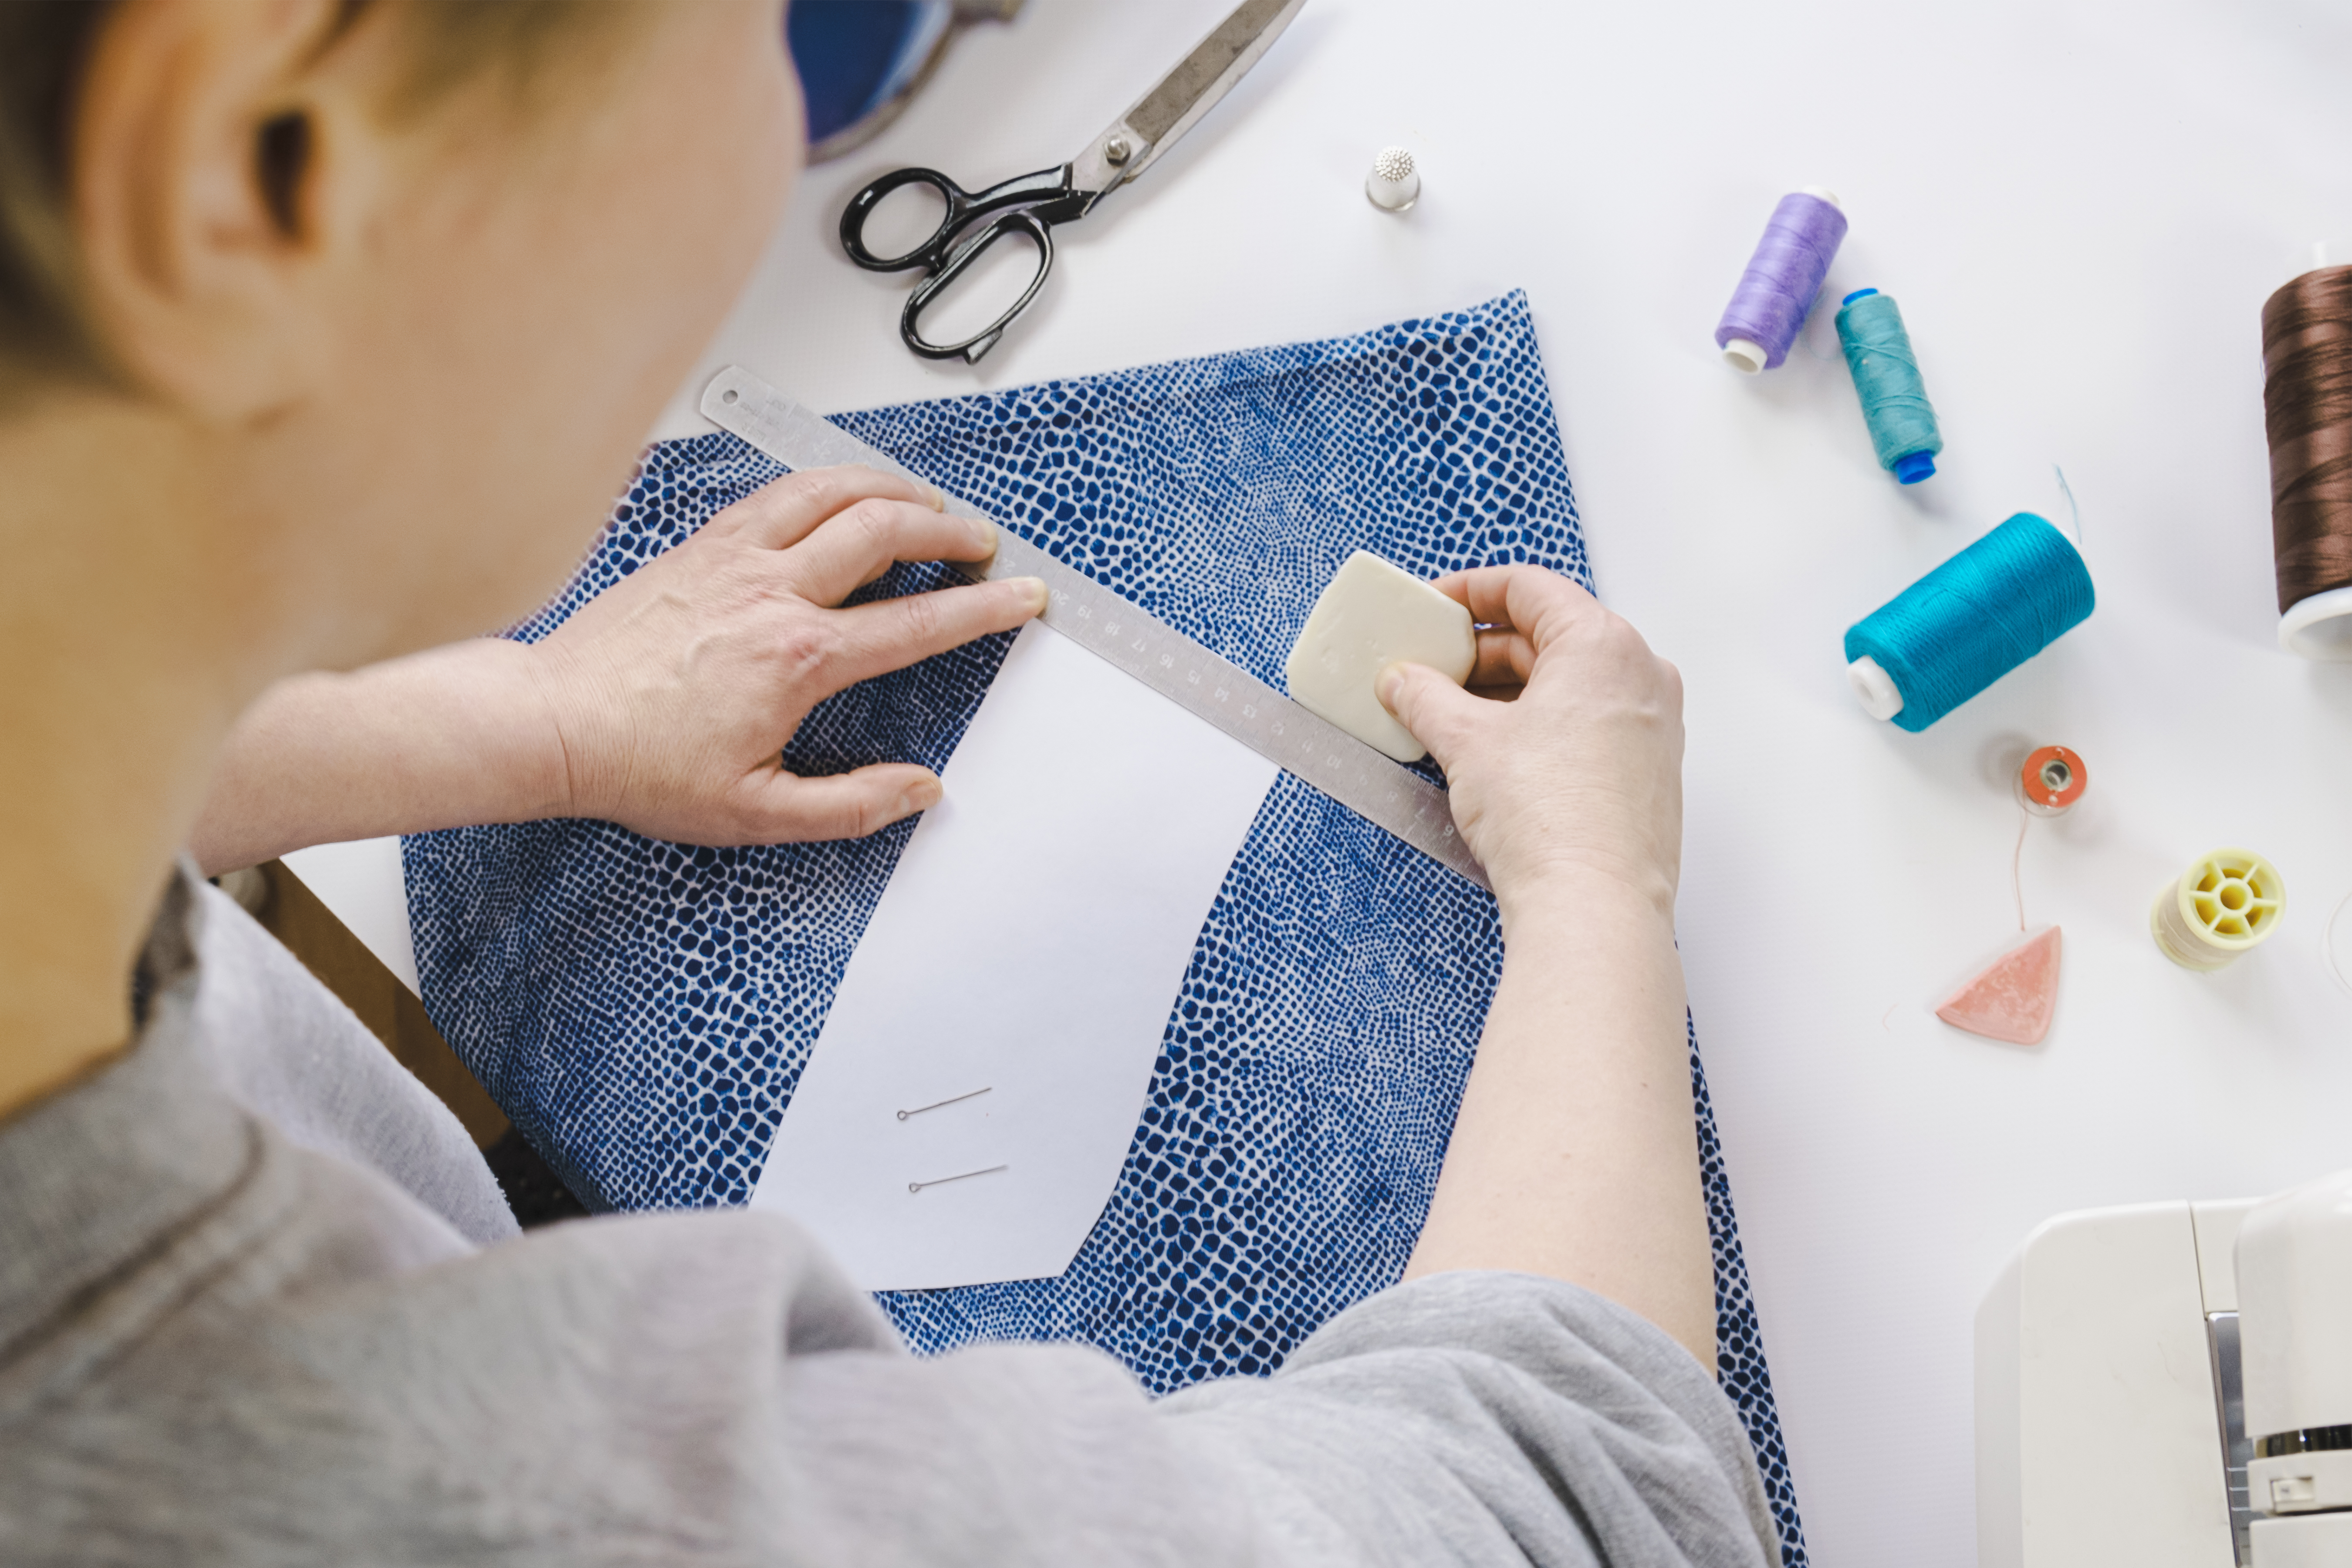 The Best Marking Tools for Sewing in 2022